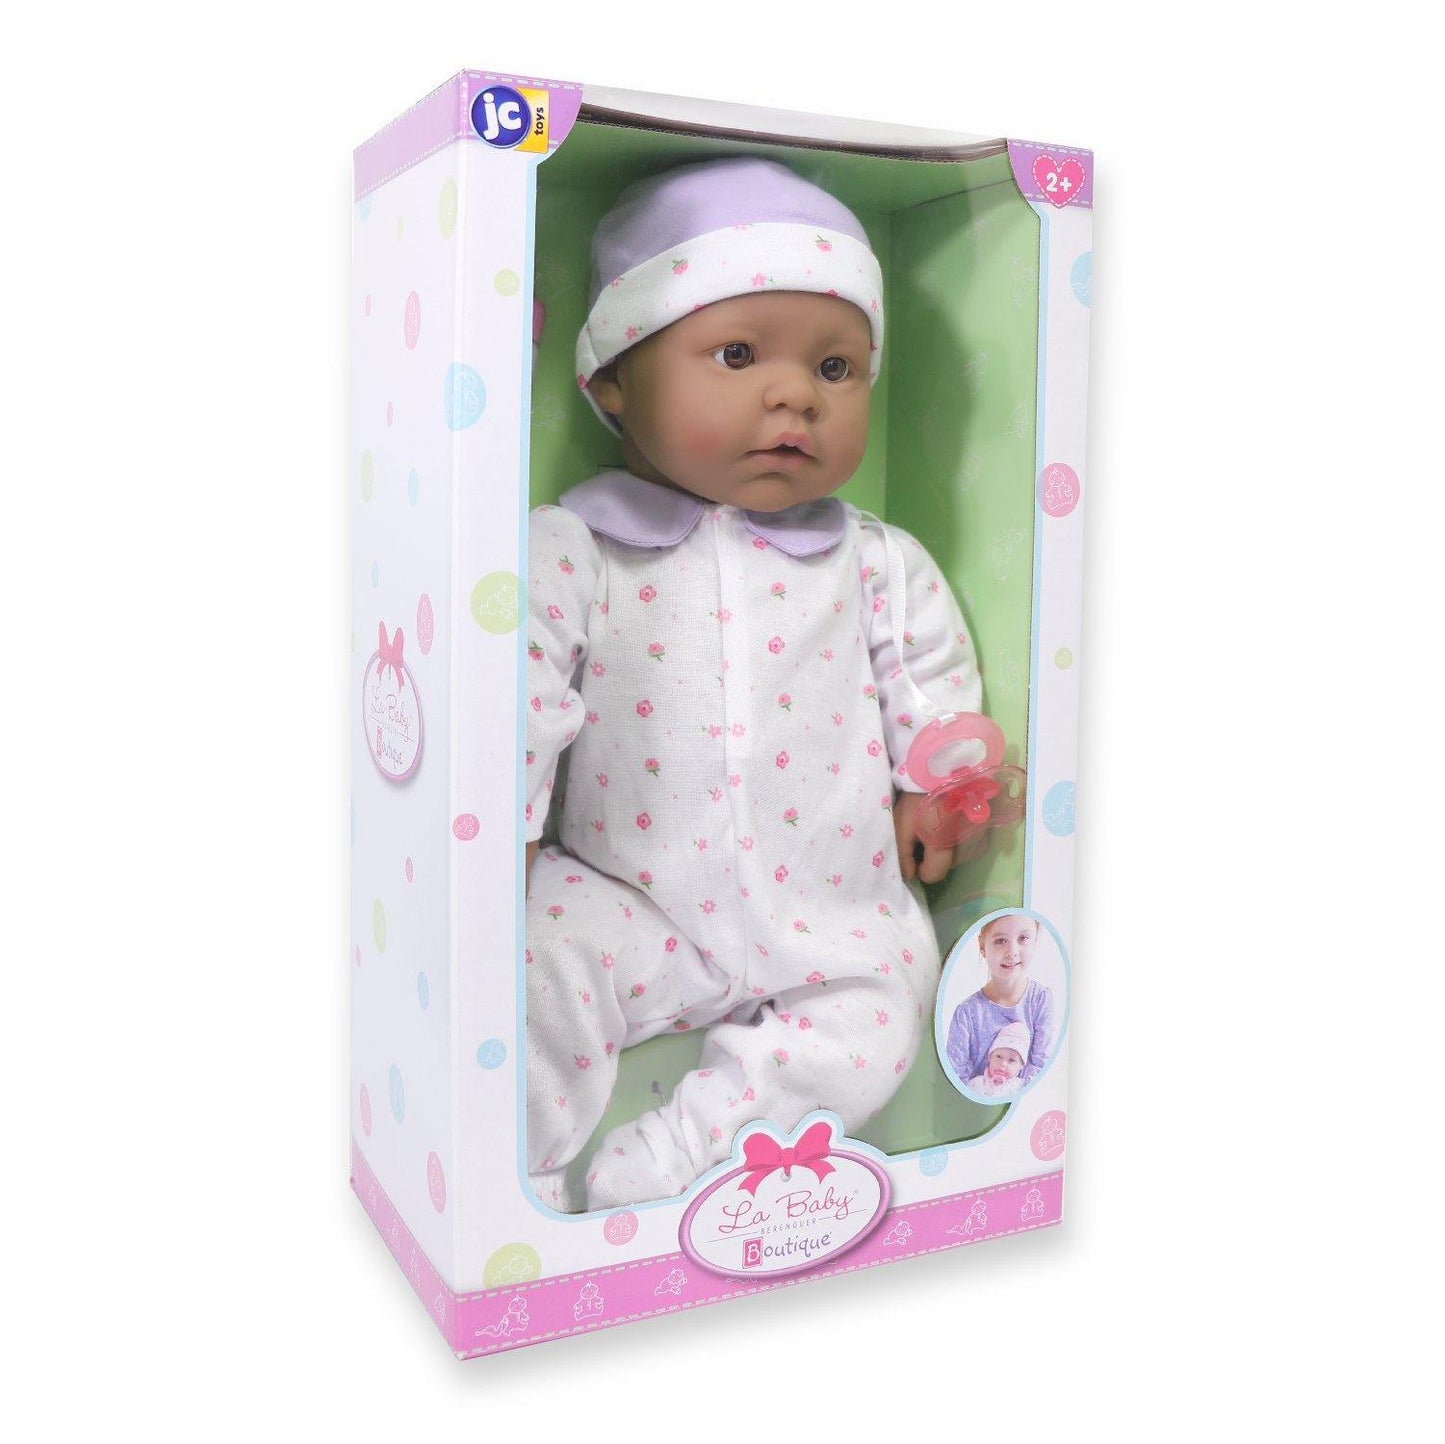 La Baby Play Doll - 20" Hispanic Soft Body Baby Doll in baby outfit Purple w/ Pacifier - JC Toys Group Inc.